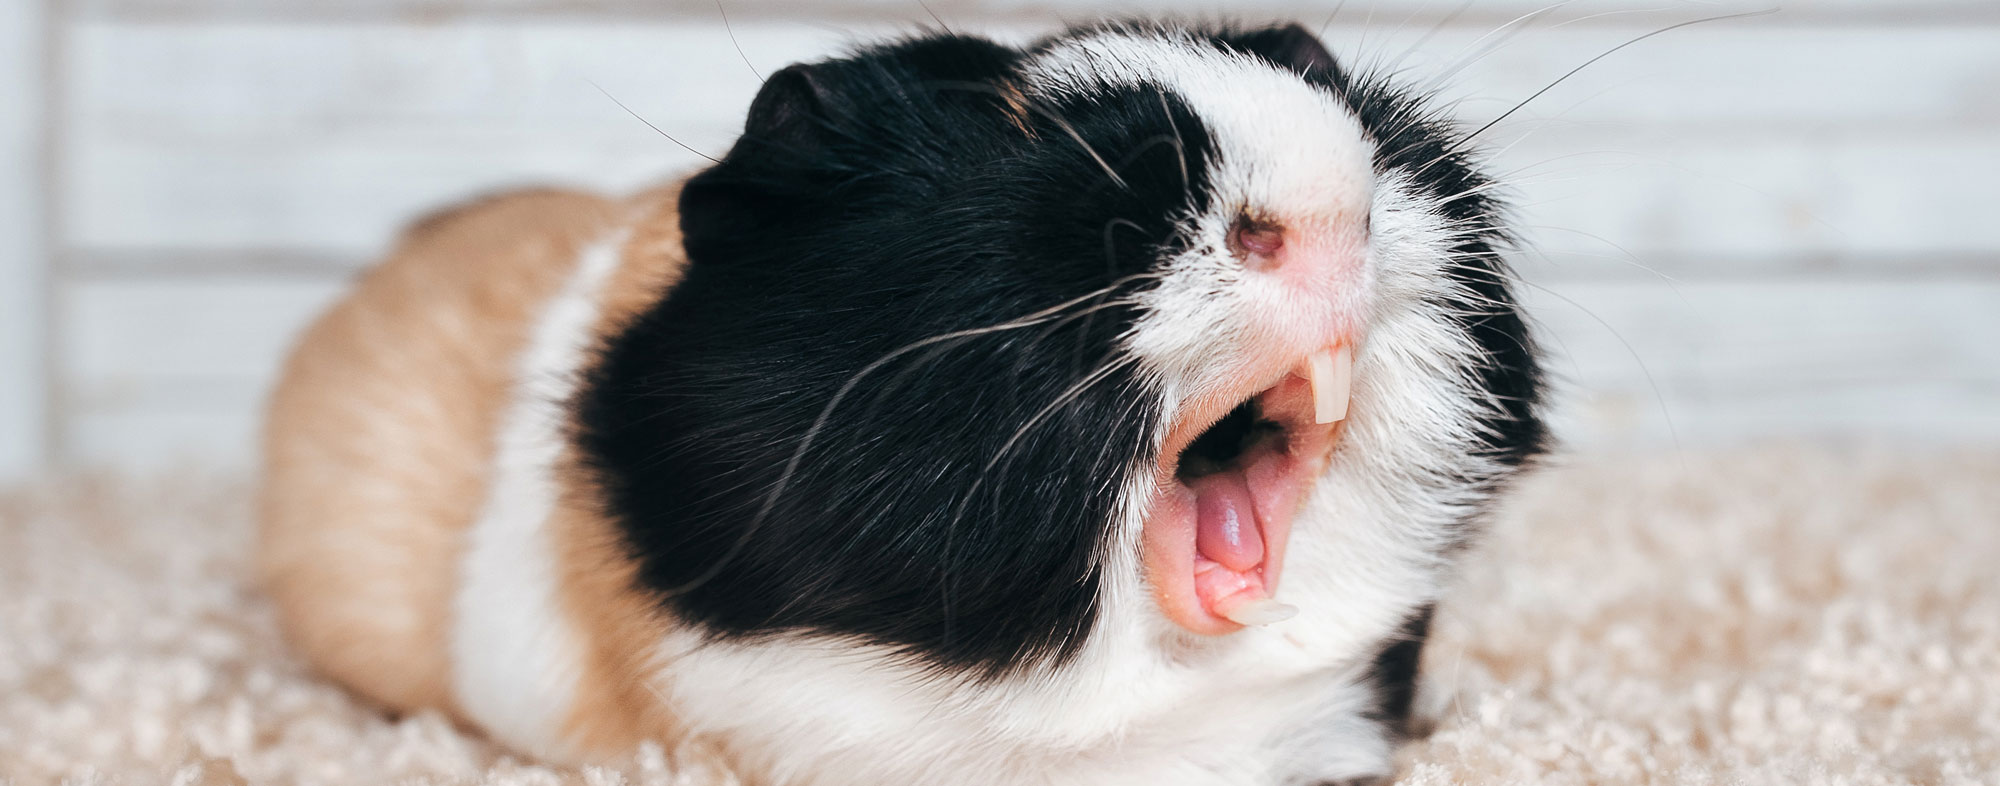 Yawning loudly, a pet guinea pig shows off their pair of white pincers